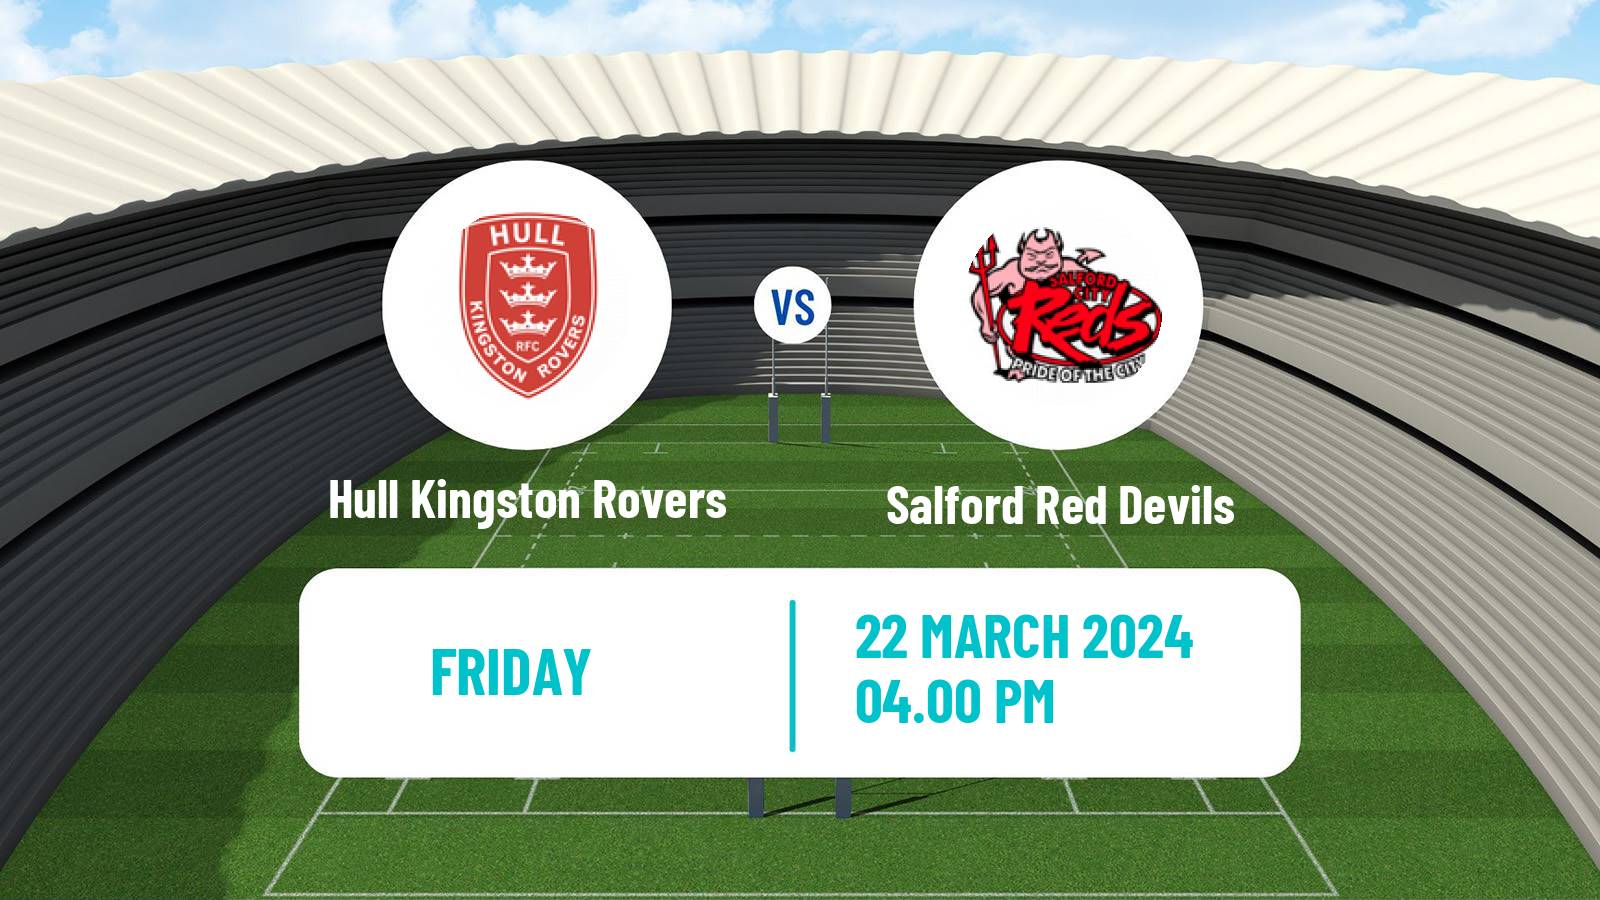 Rugby league Challenge Cup Rugby League Hull Kingston Rovers - Salford Red Devils